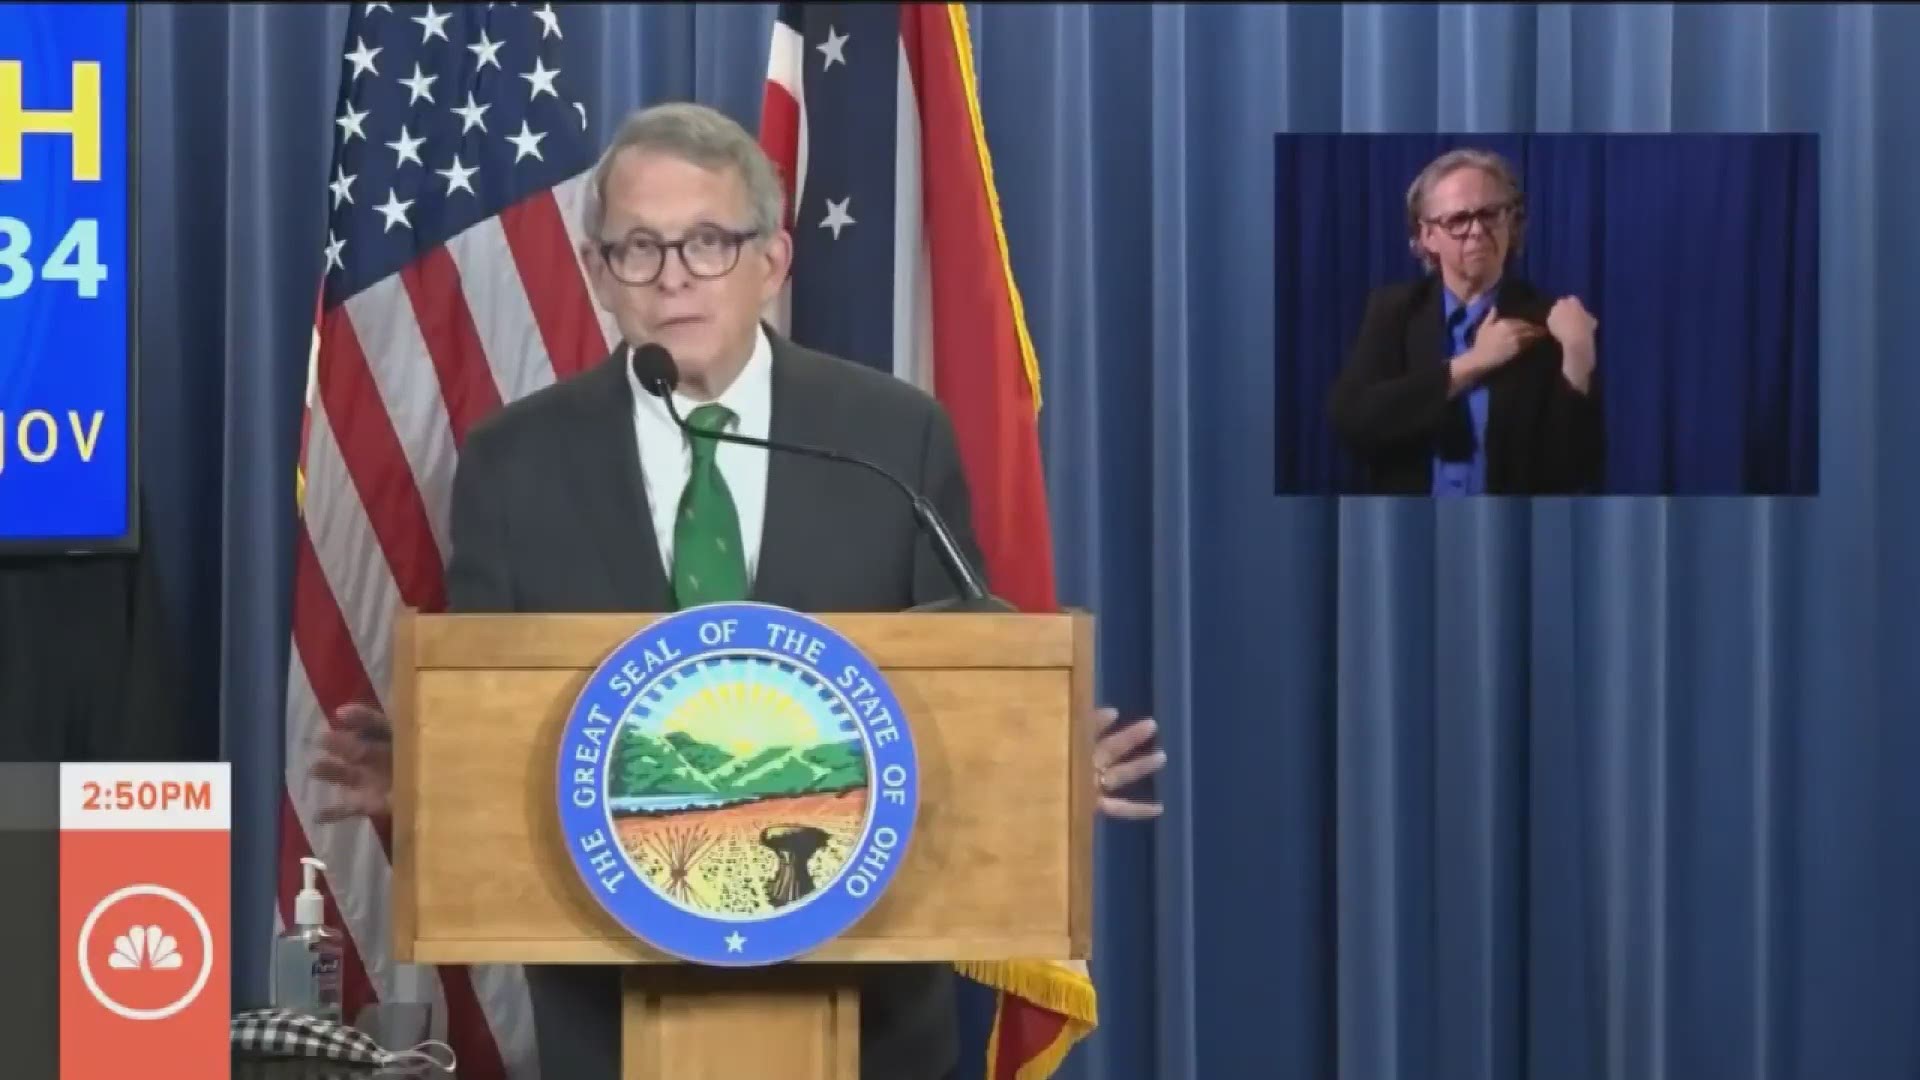 What would happen if Ohio sees an increase in new coronavirus cases? Ohio Gov. Mike DeWine was asked if he would pause the reopening process or reinstate closures.